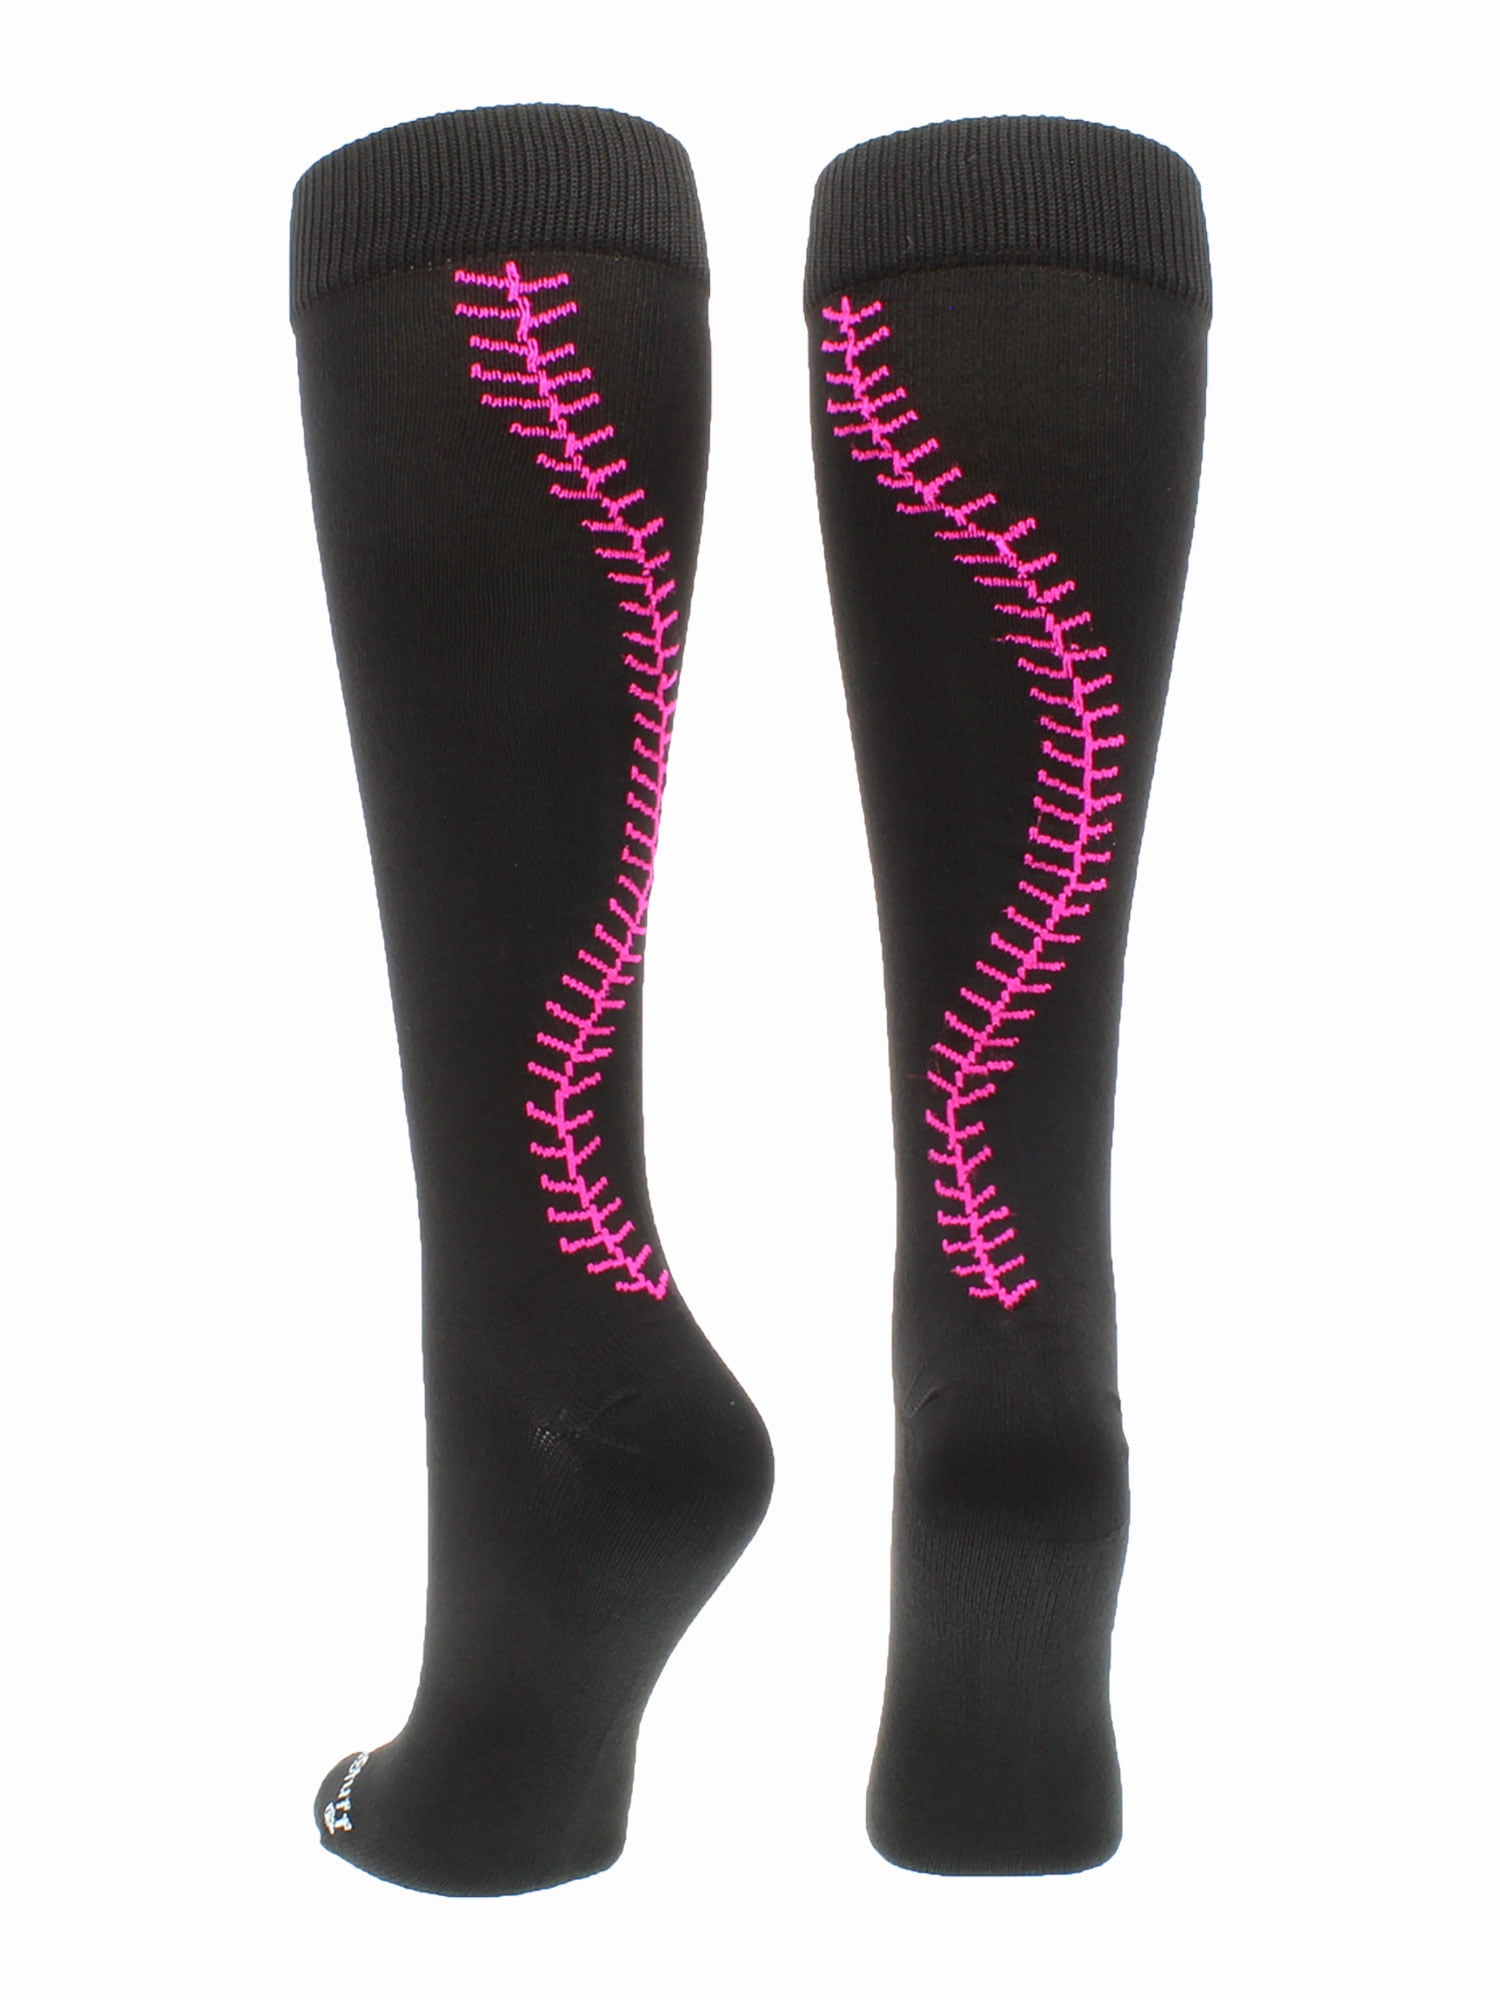 MadSportsStuff Softball Socks or Baseball Socks with Stitches in Crew Length Multiple Colors 